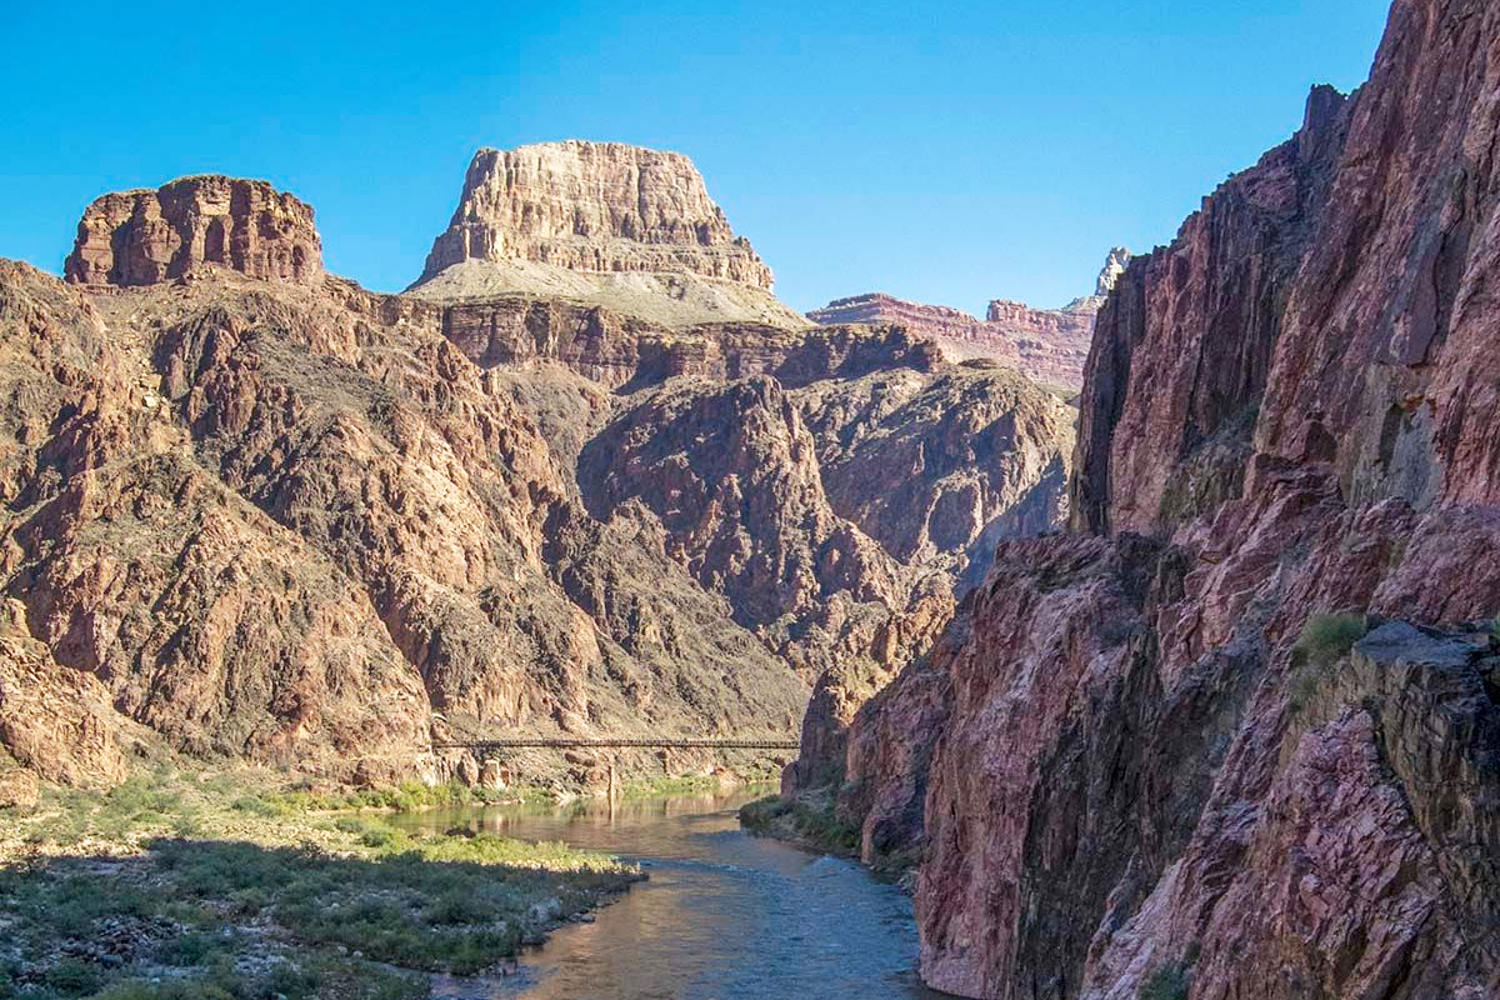 Texas hiker dies after collapsing in Grand Canyon National Park